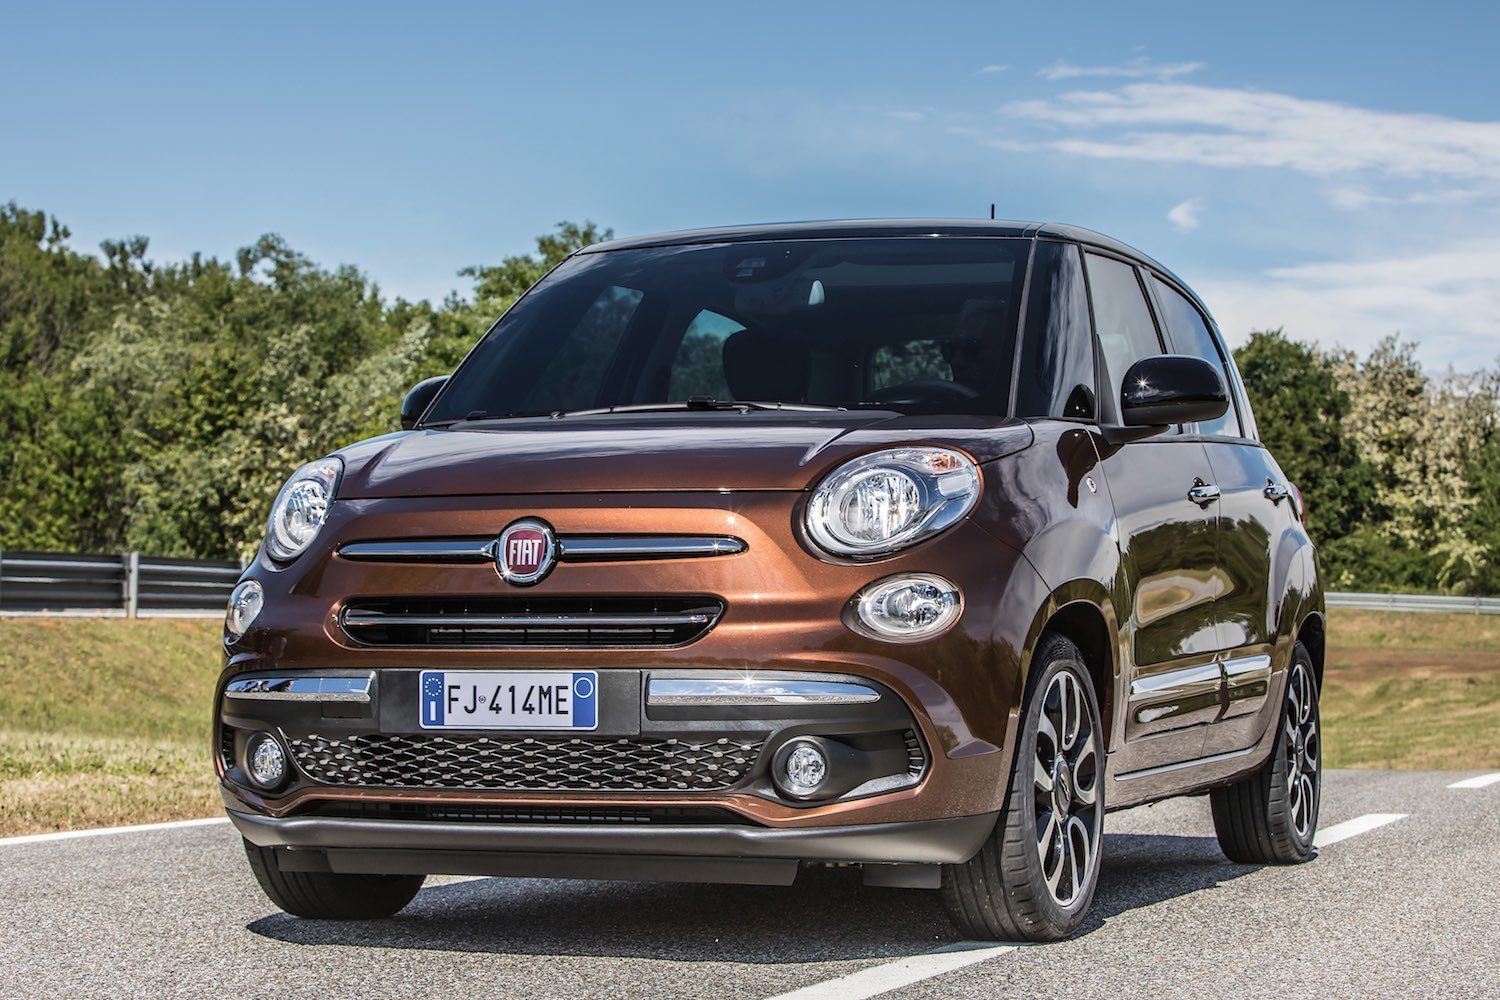 Tim Barnes-Clay reviews the New Fiat 500L from the first drive in Italy 1